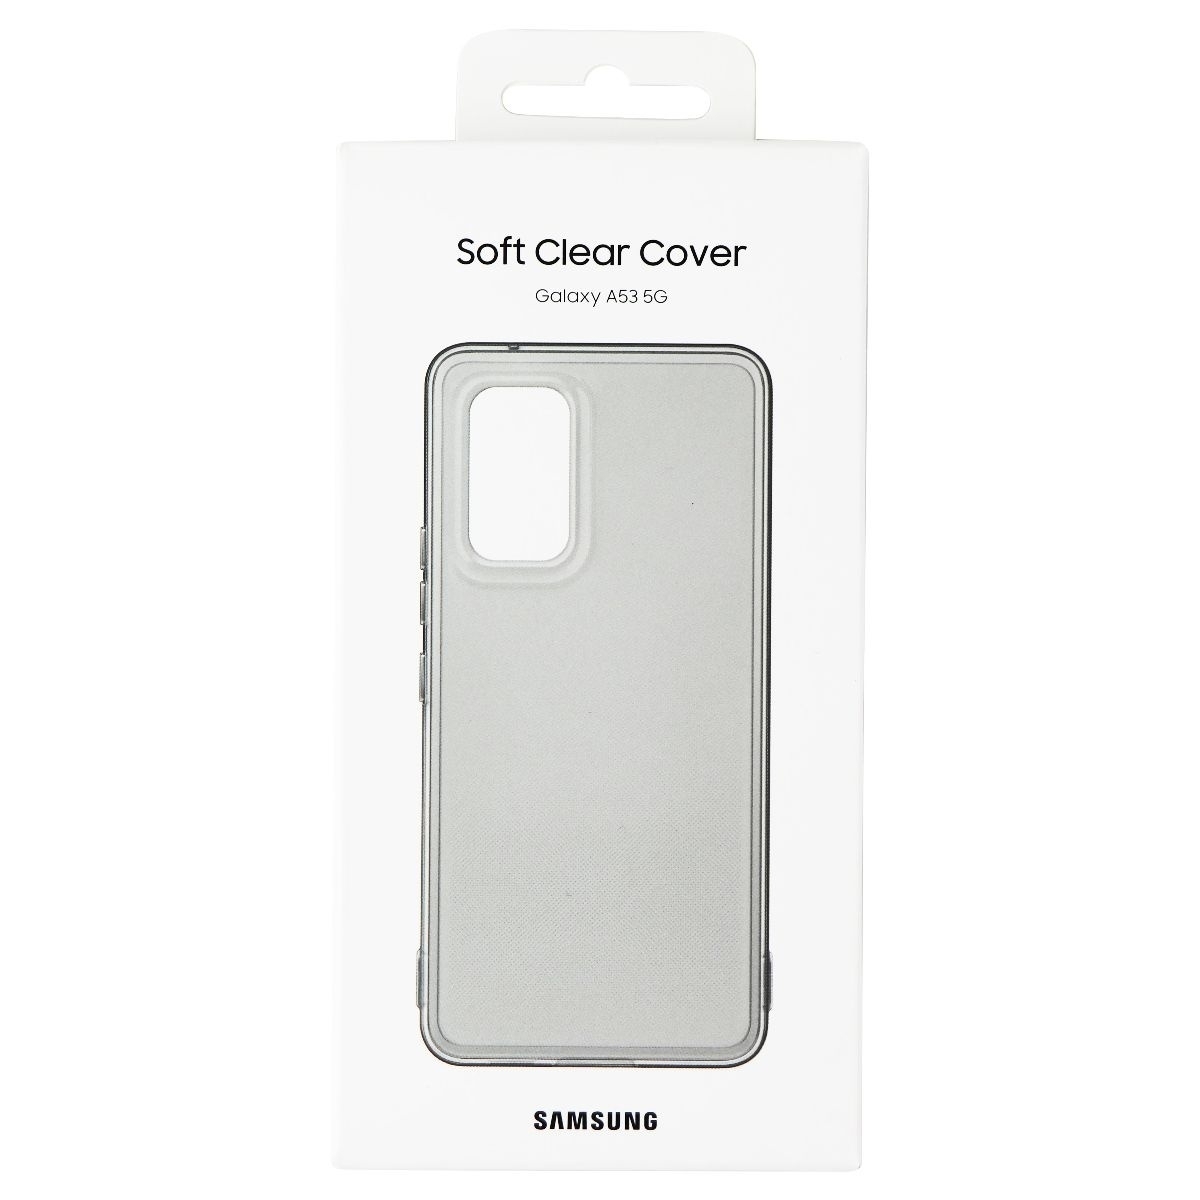 Samsung Official Soft Clear Cover For Samsung Galaxy A53 5G Smartphone - Black